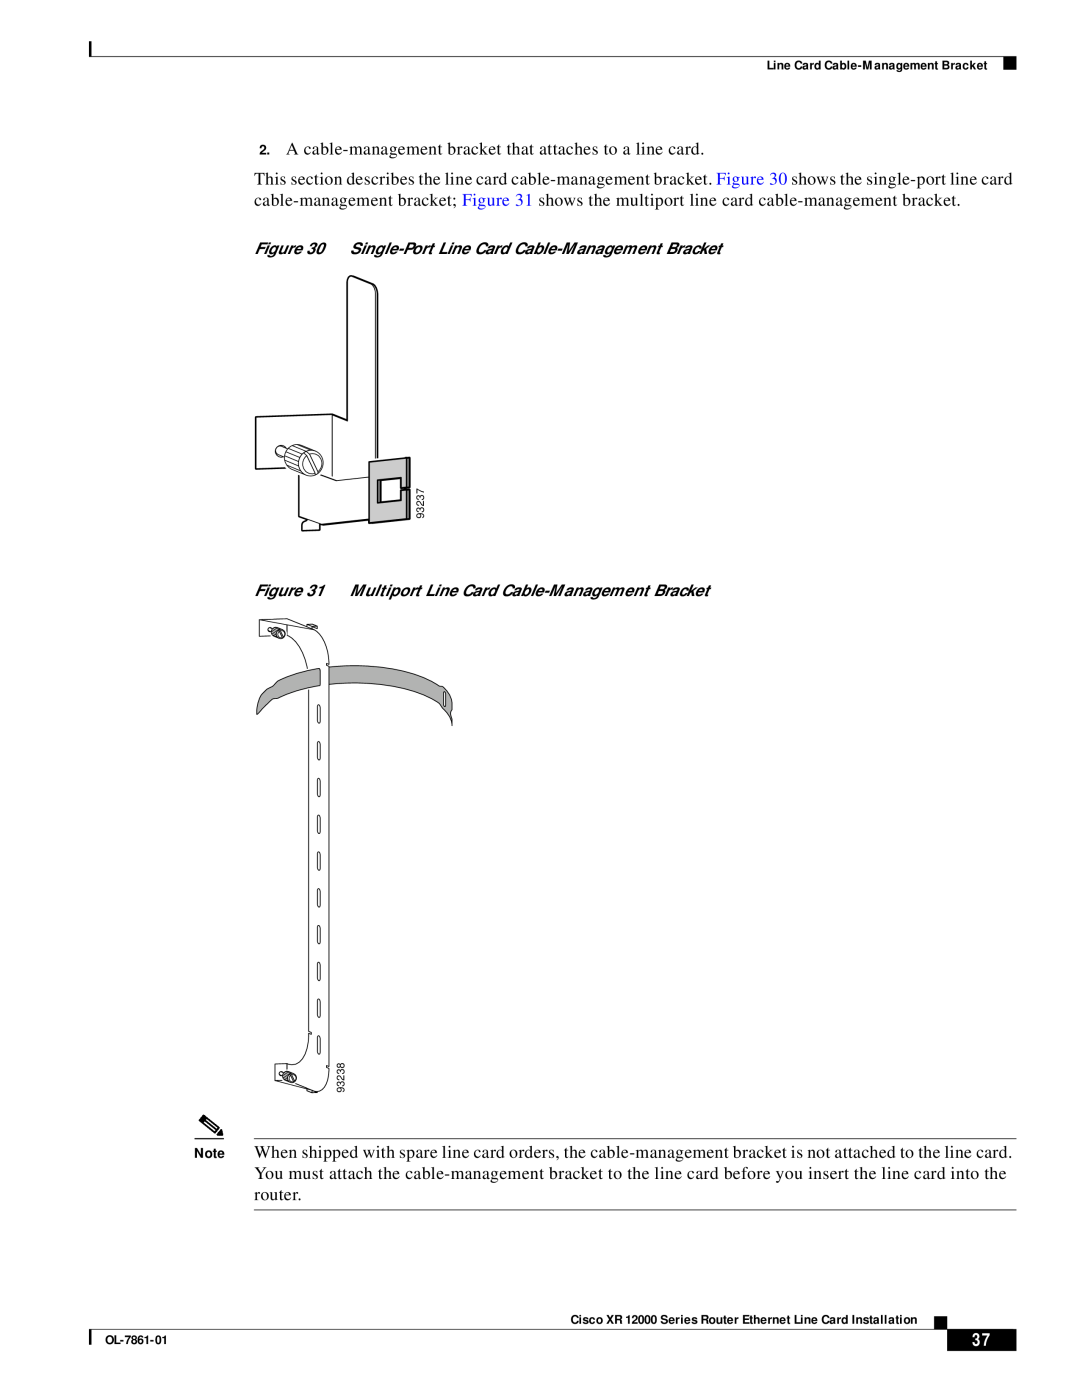 Cisco Systems OL-7861-01 manual A cable-management bracket that attaches to a line card 